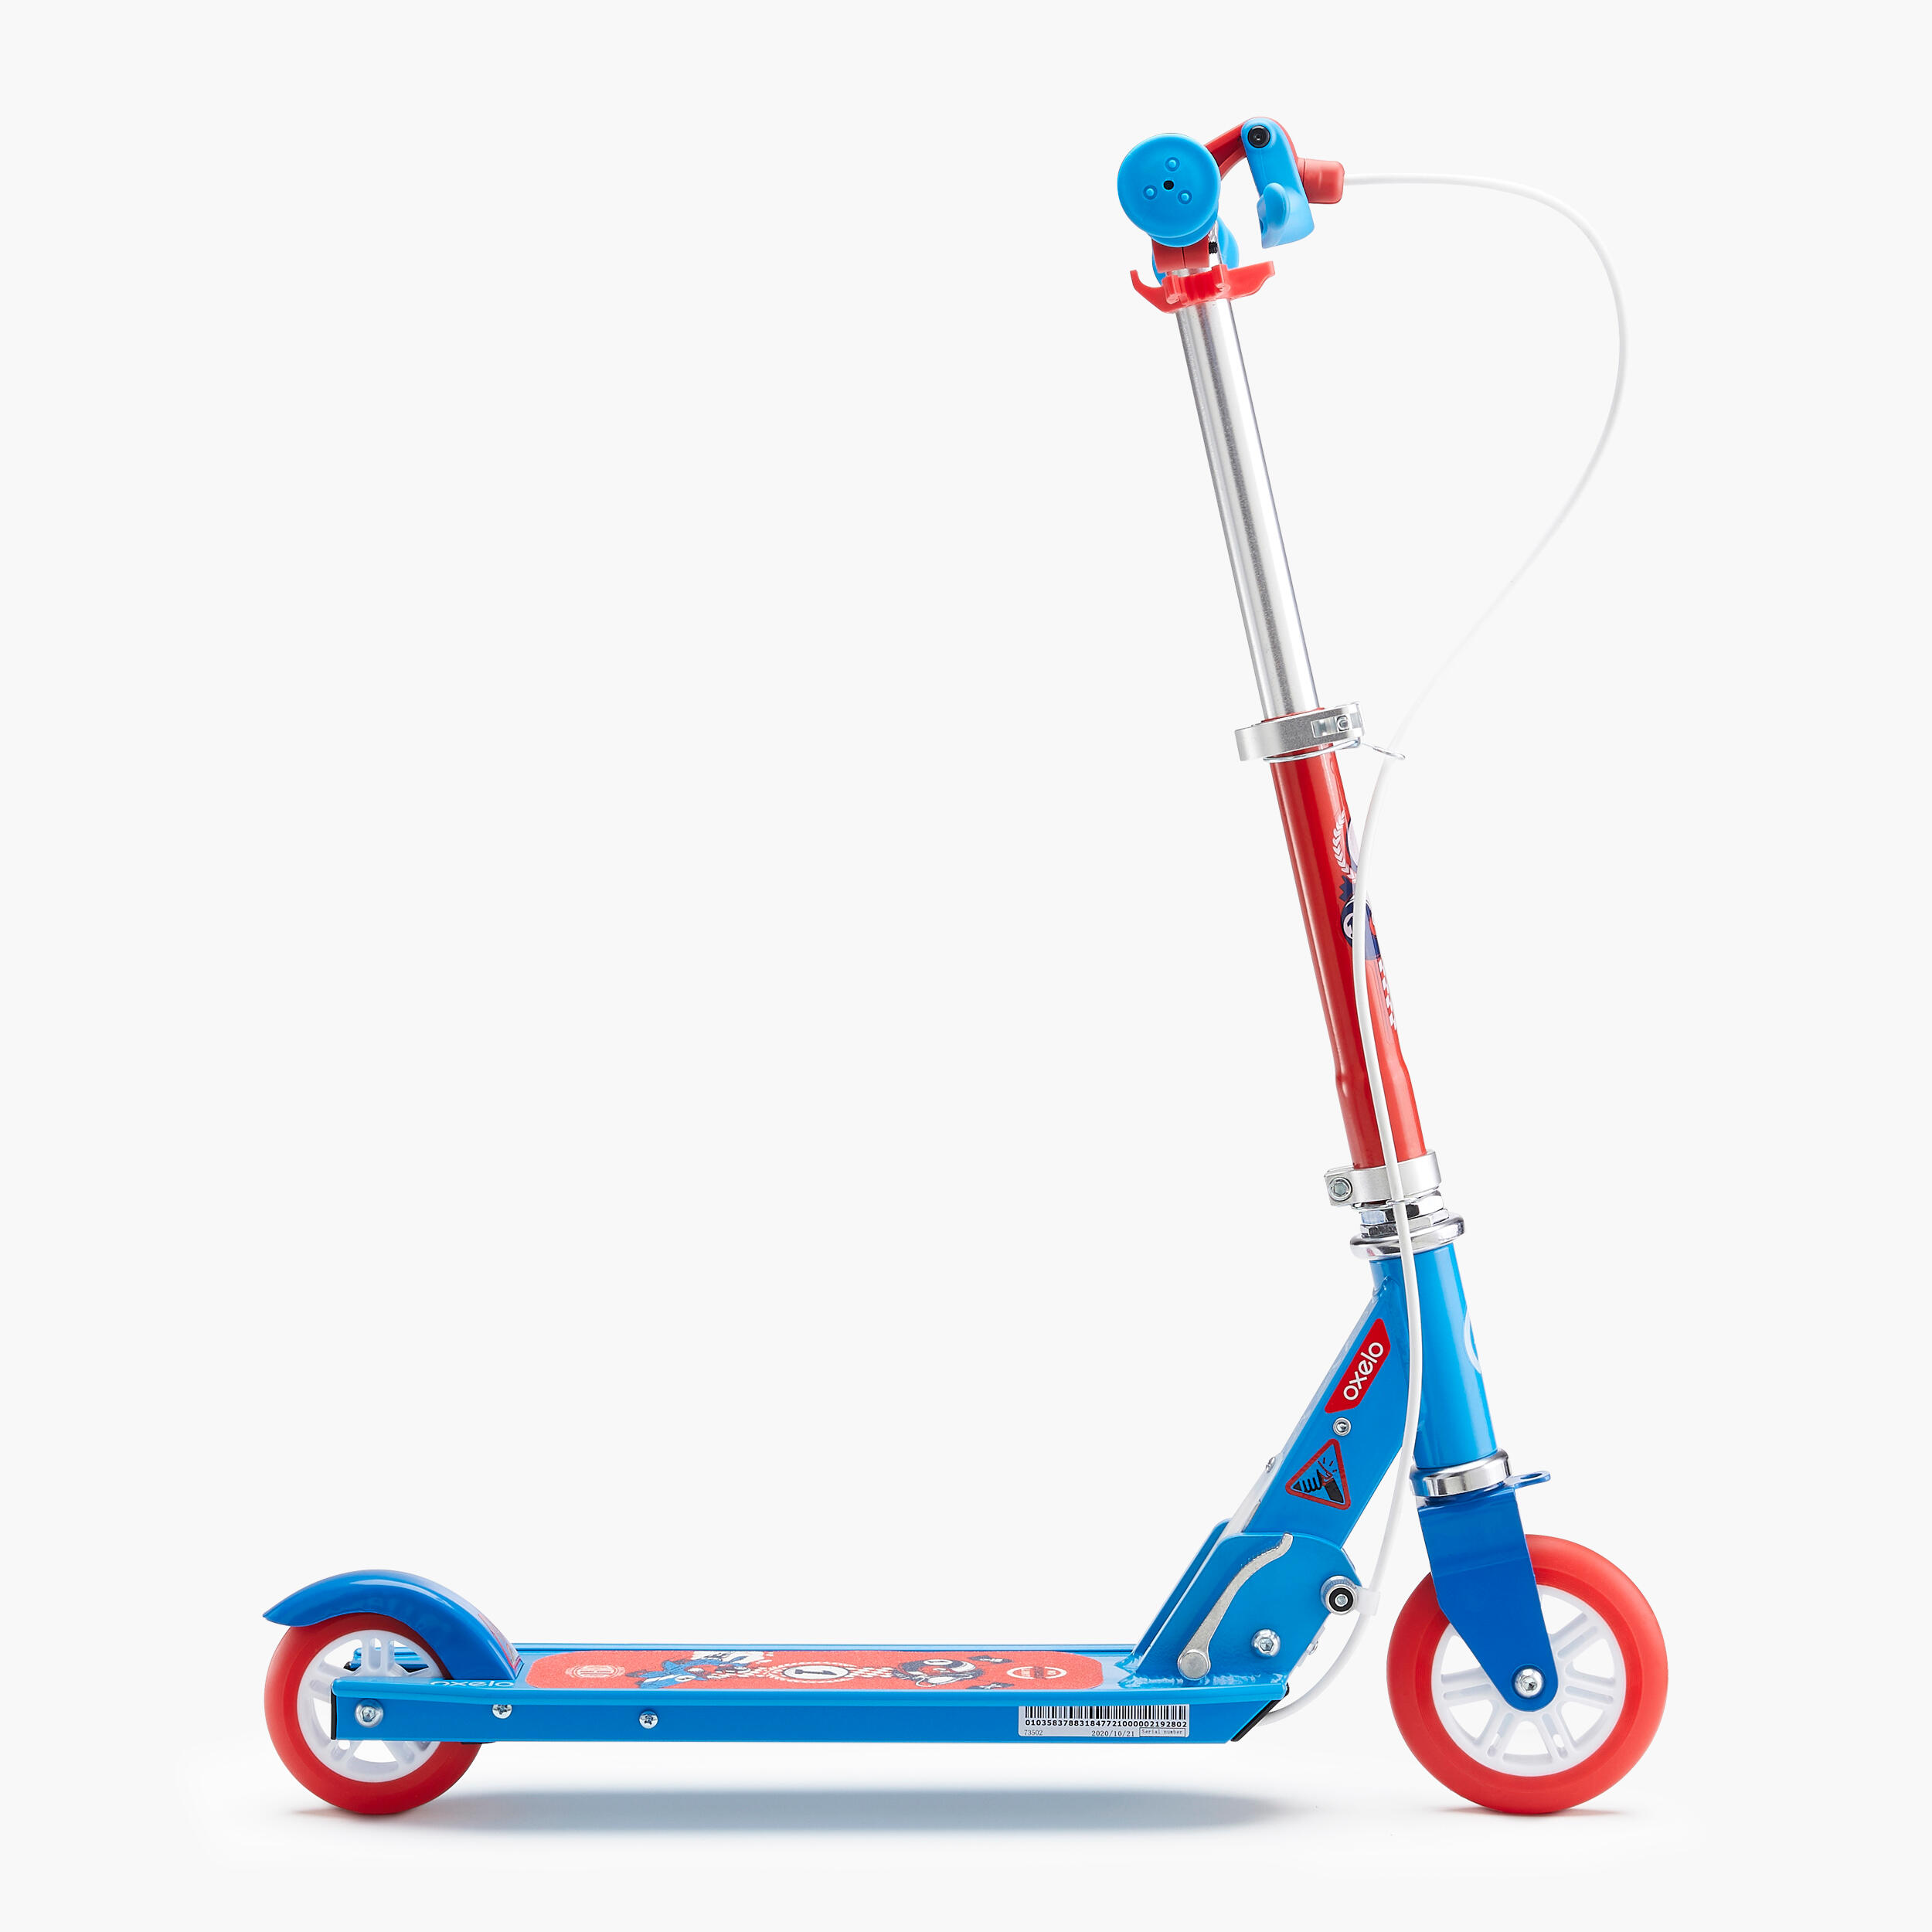 Play 5 Children's Scooter with Brake - Blue - OXELO